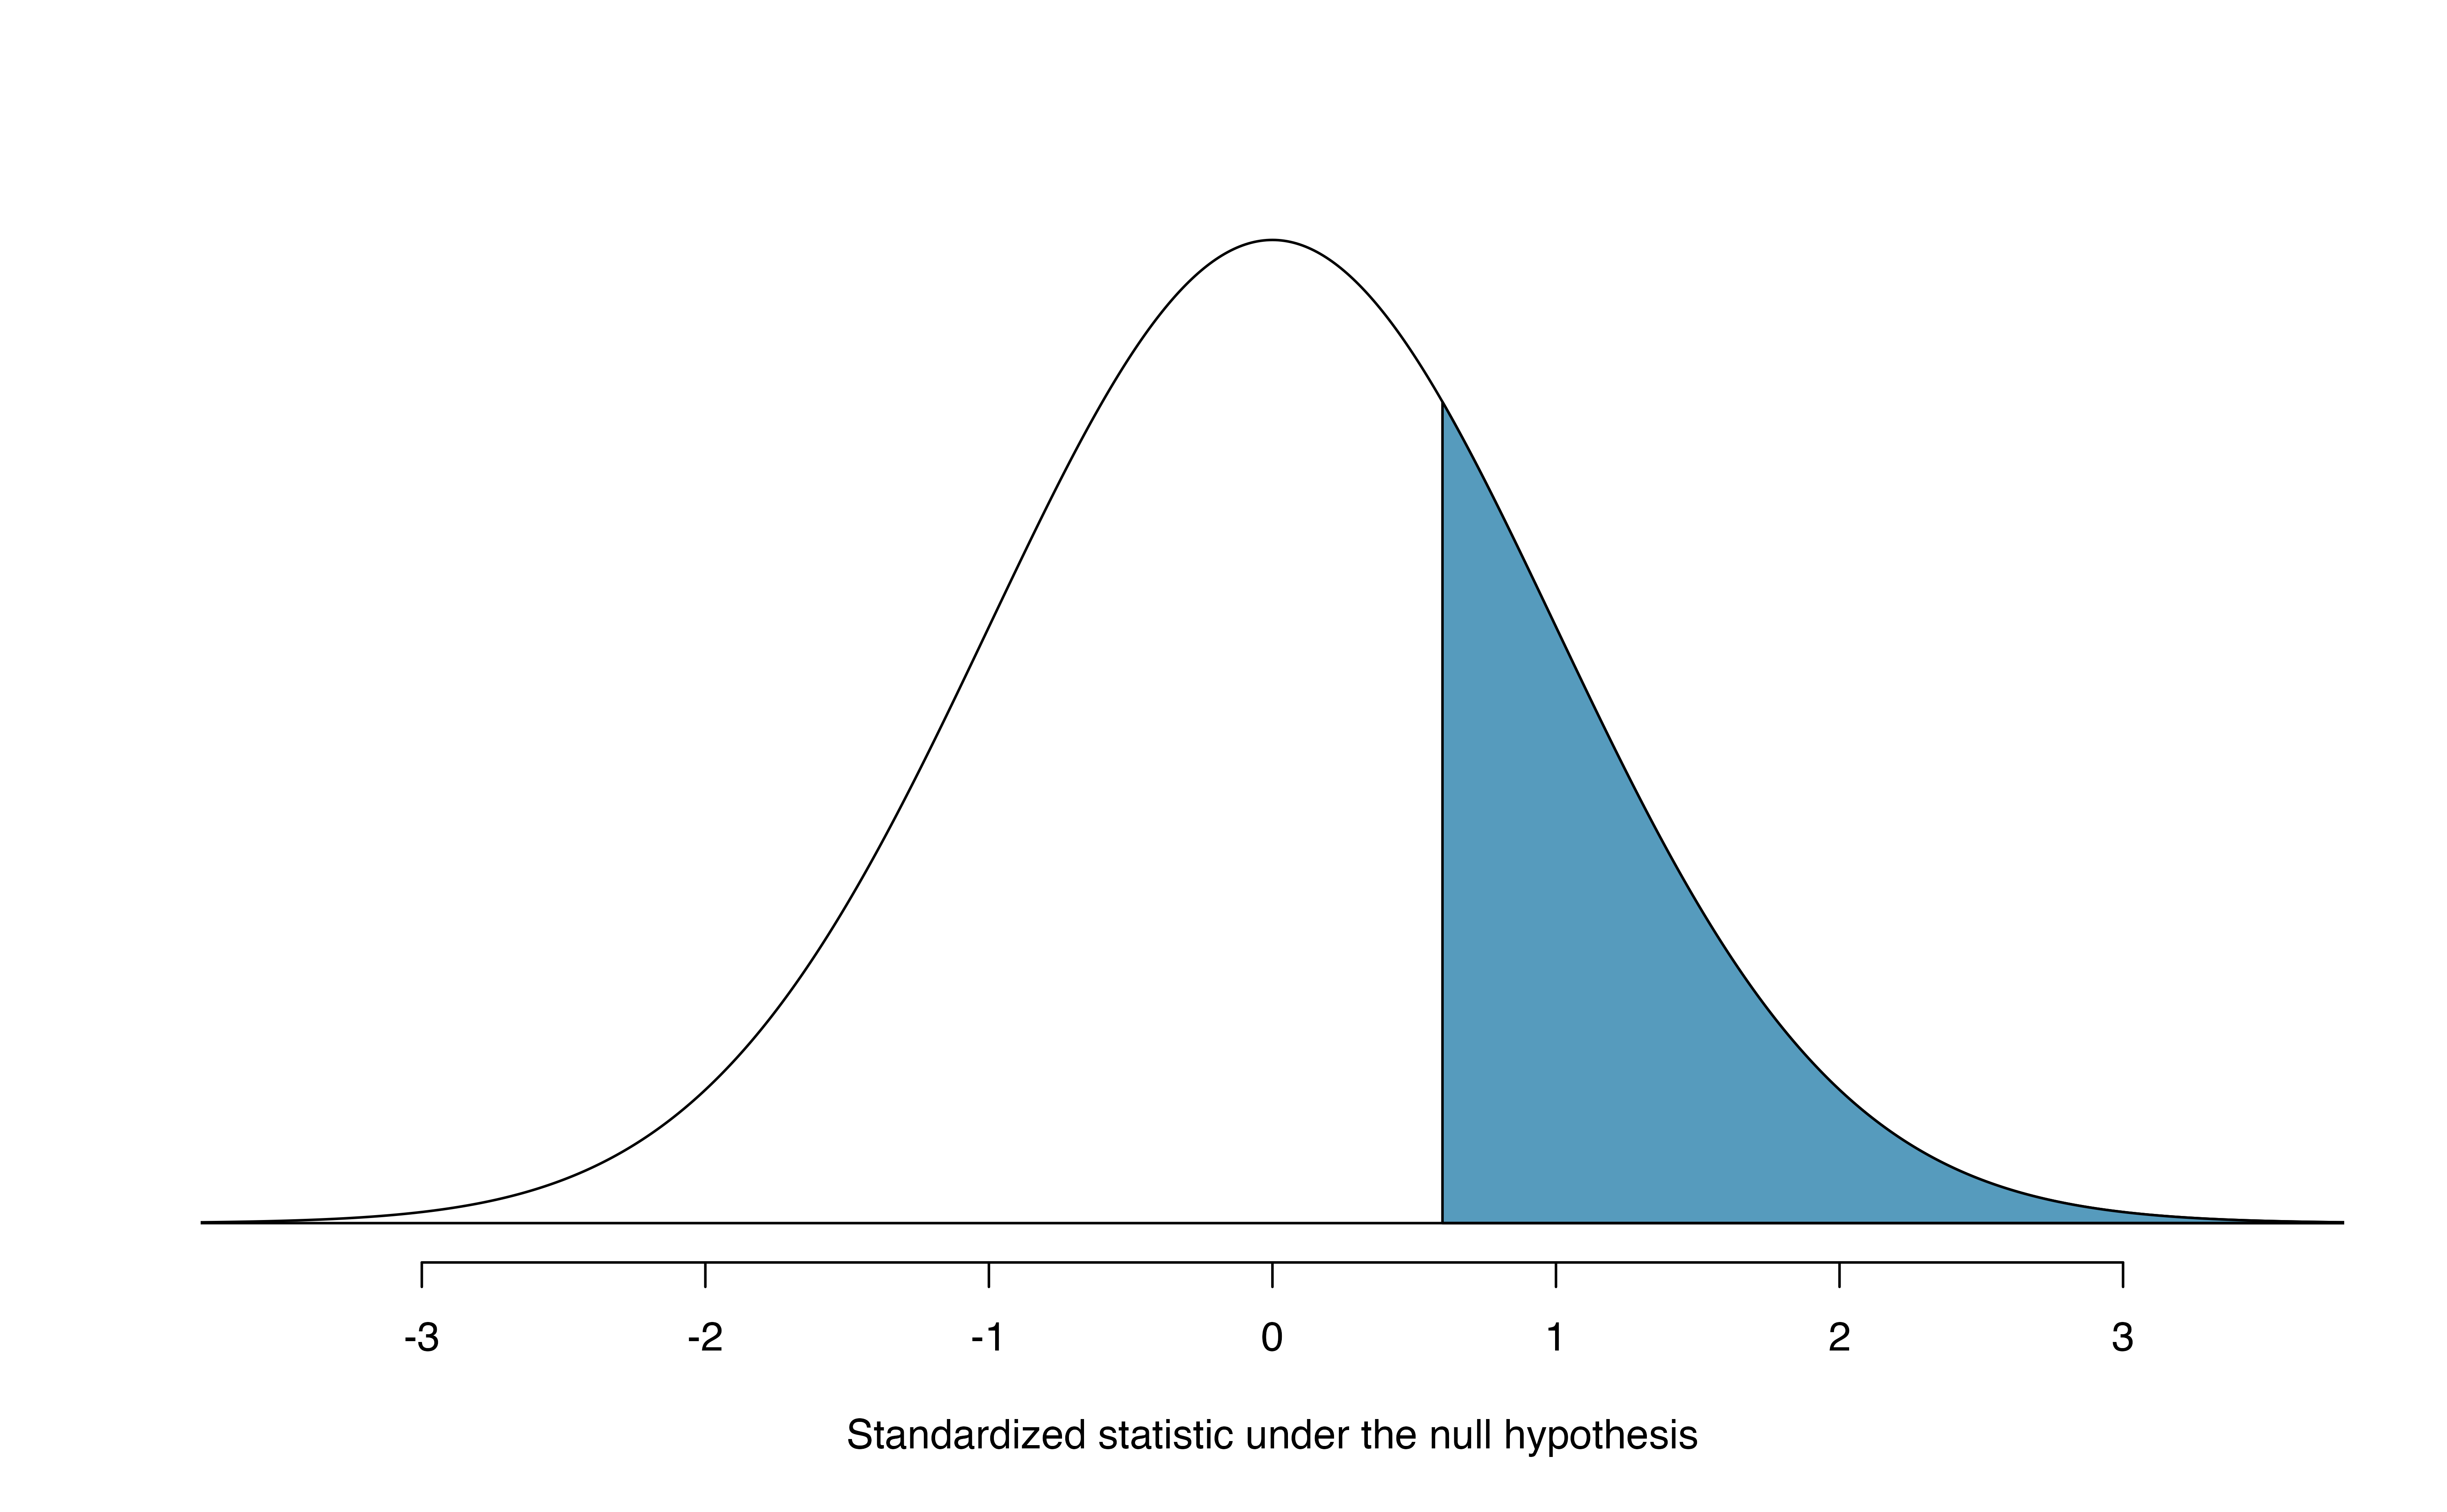 Approximate sampling distribution of \(Z\) across all possible samples assuming \(\pi = 0.50\). The shaded area represents the p-value corresponding to an observed standardized statistic of 0.59. Compare to Figure 14.2.